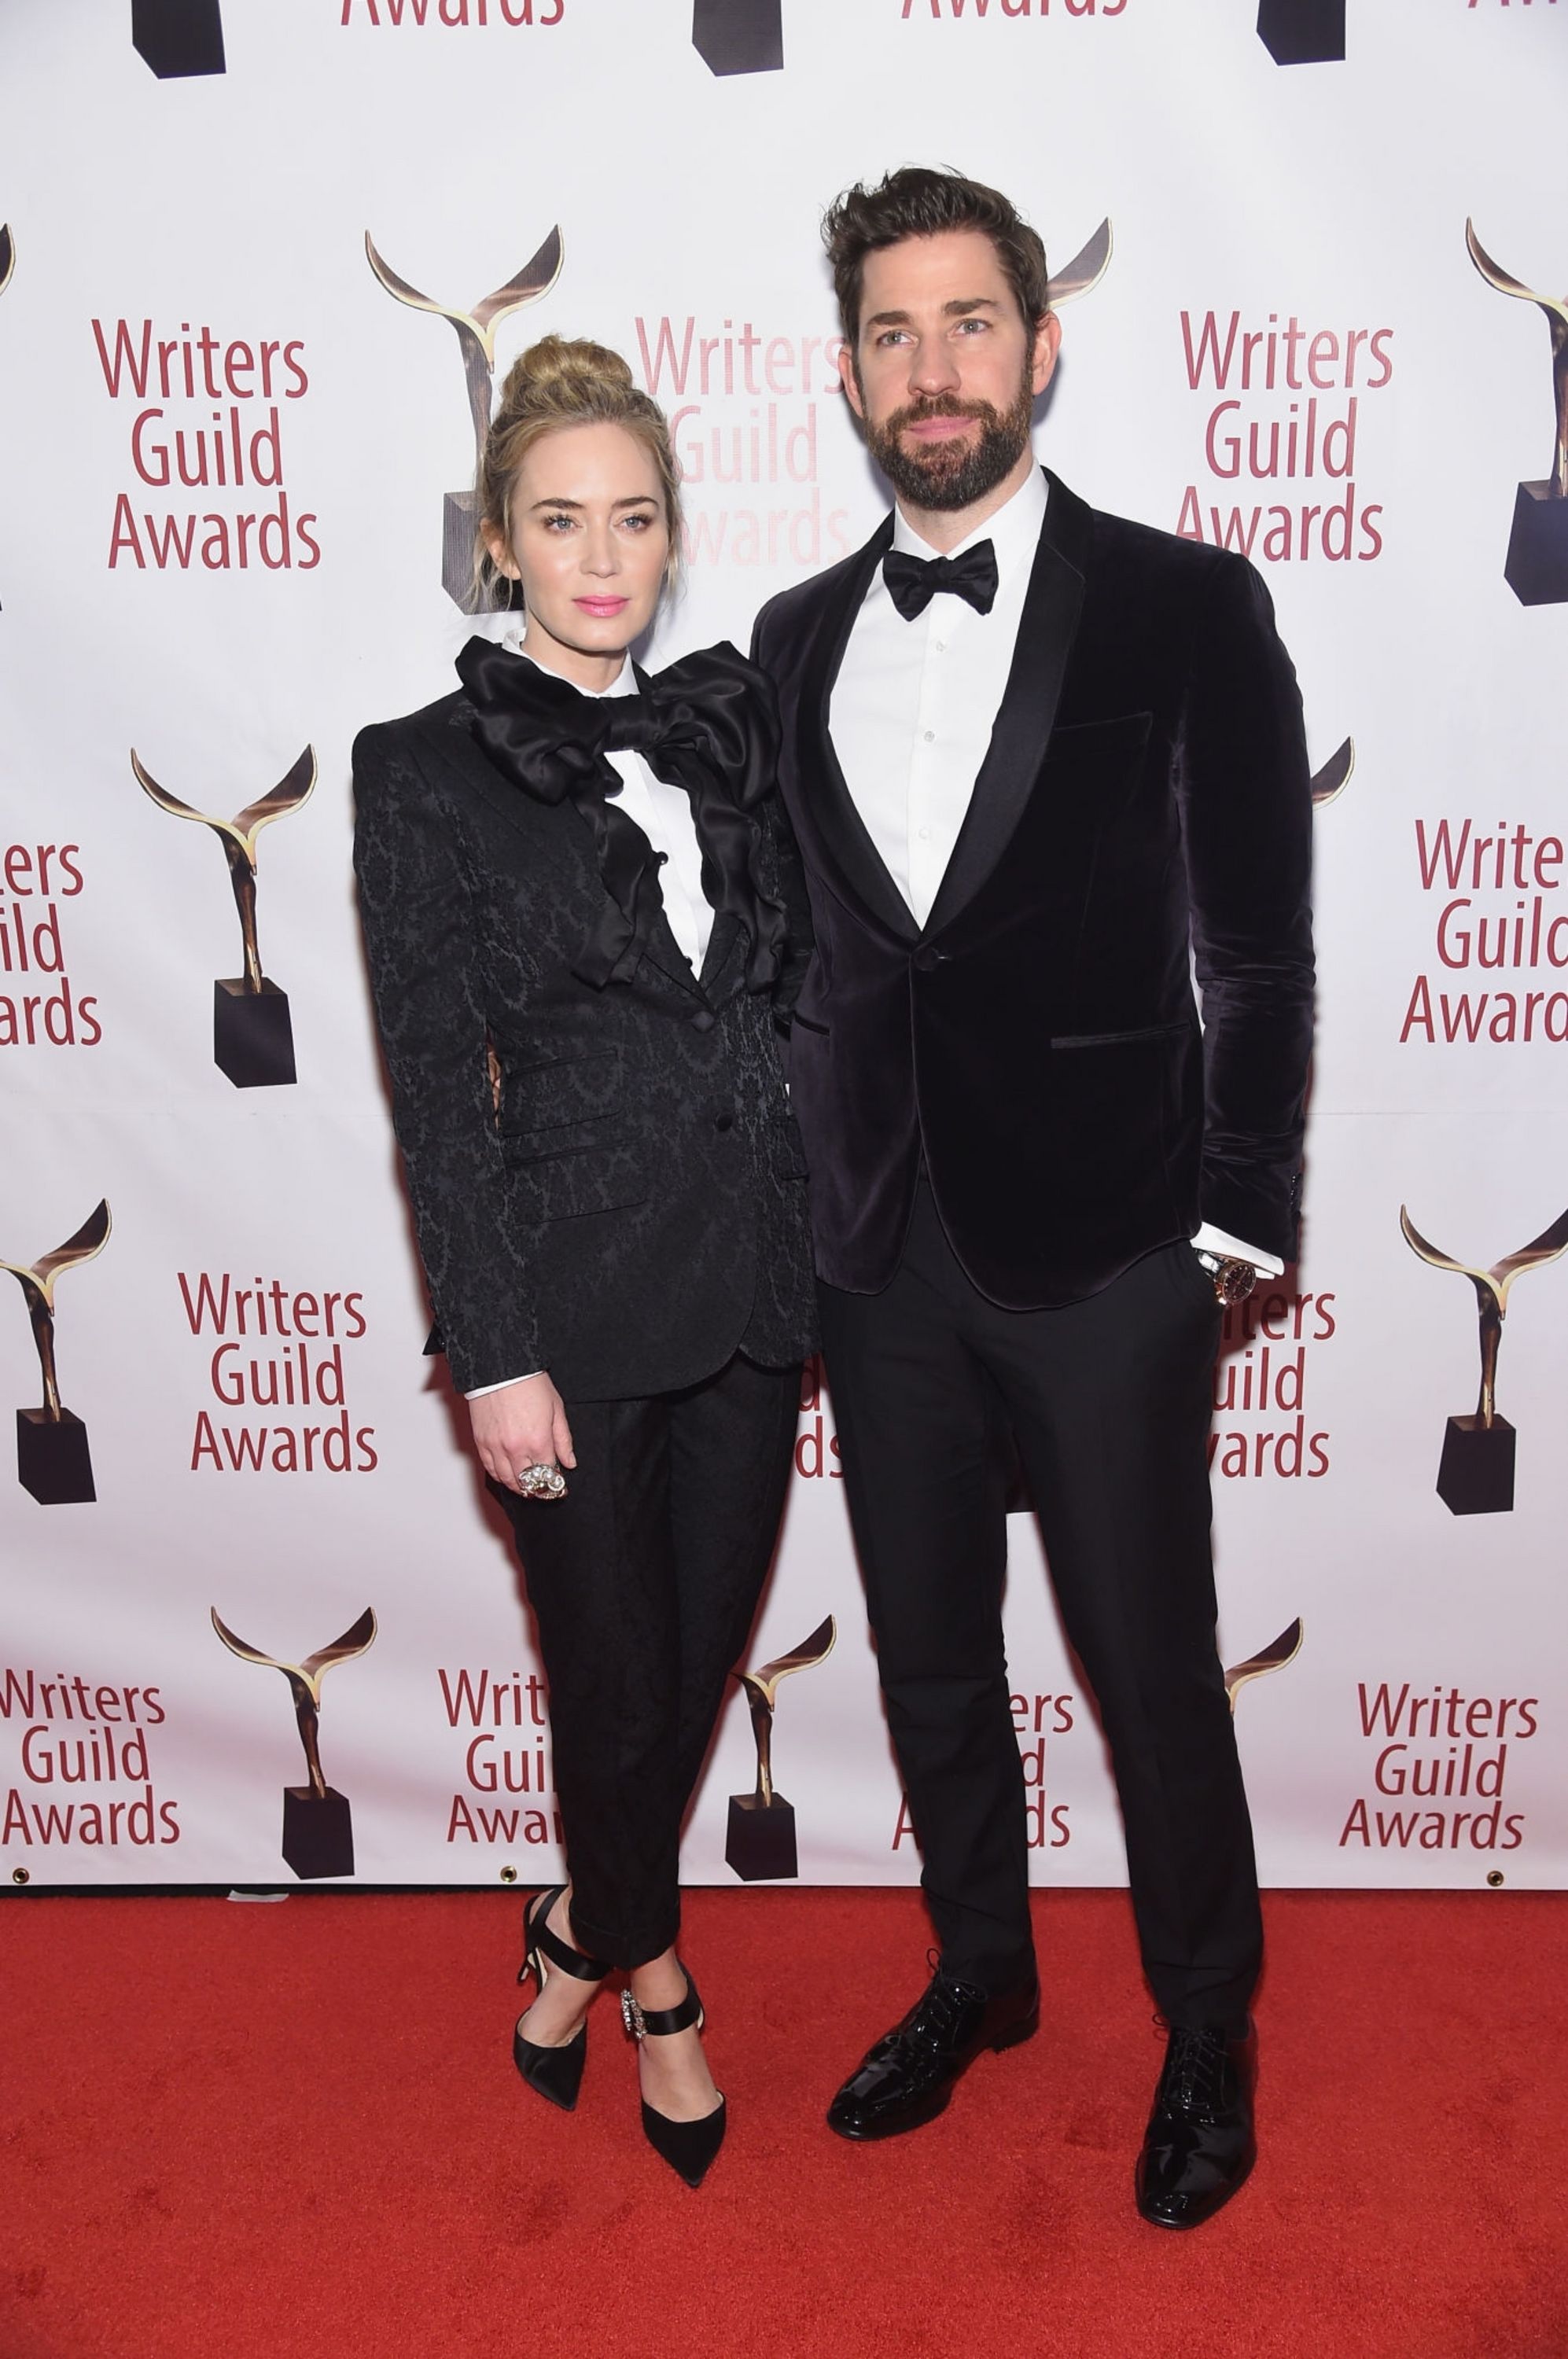 2019-02-17-71st-Annual-Writers-Guild-Awards-014.jpg